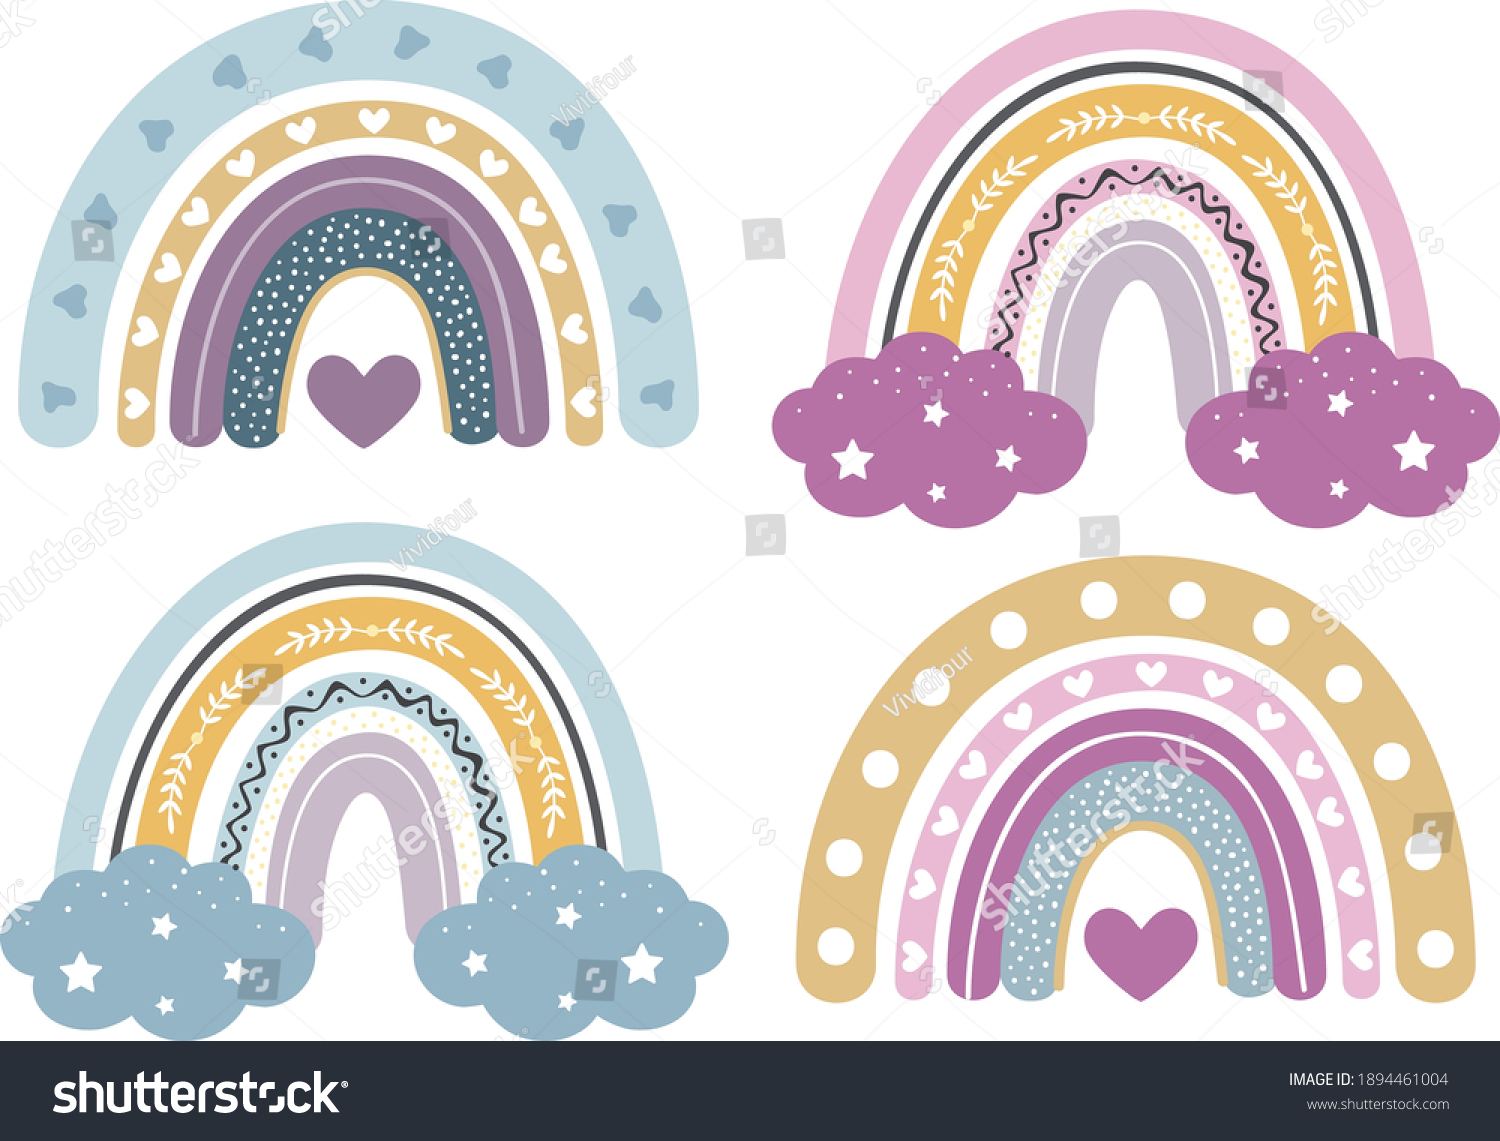 SVG of Baby Rainbow Clipart, Nursery Rainbow Decoration, Svg, Rainbow Clipart Bundle, Pastel Colors, Rainbow for Printing and for Cutting svg